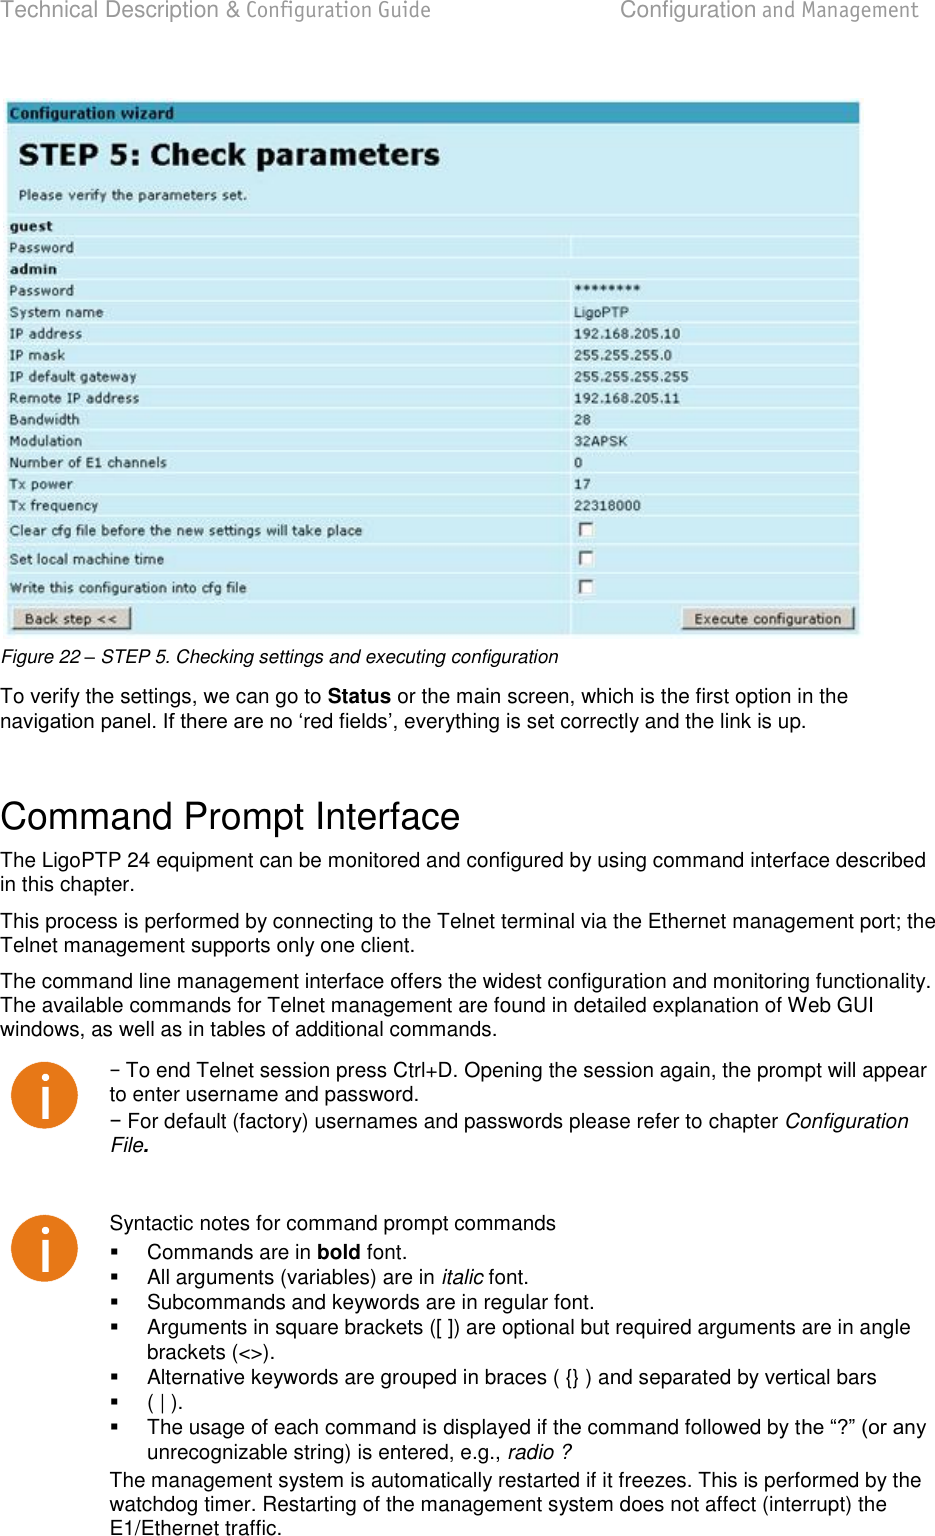 Technical Description &amp; Configuration Guide  Configuration and Management  LigoWave  Page 27  Figure 22 – STEP 5. Checking settings and executing configuration To verify the settings, we can go to Status or the main screen, which is the first option in the navred fi, everything is set correctly and the link is up.  Command Prompt Interface  The LigoPTP 24 equipment can be monitored and configured by using command interface described in this chapter. This process is performed by connecting to the Telnet terminal via the Ethernet management port; the Telnet management supports only one client.  The command line management interface offers the widest configuration and monitoring functionality. The available commands for Telnet management are found in detailed explanation of Web GUI windows, as well as in tables of additional commands.   To end Telnet session press Ctrl+D. Opening the session again, the prompt will appear to enter username and password.   For default (factory) usernames and passwords please refer to chapter Configuration File.   Syntactic notes for command prompt commands   Commands are in bold font.    All arguments (variables) are in italic font.    Subcommands and keywords are in regular font.    Arguments in square brackets ([ ]) are optional but required arguments are in angle brackets (&lt;&gt;).    Alternative keywords are grouped in braces ( {} ) and separated by vertical bars    ( | ).   The usage of each command is displayed if the command followed by tunrecognizable string) is entered, e.g., radio ? The management system is automatically restarted if it freezes. This is performed by the watchdog timer. Restarting of the management system does not affect (interrupt) the E1/Ethernet traffic.  